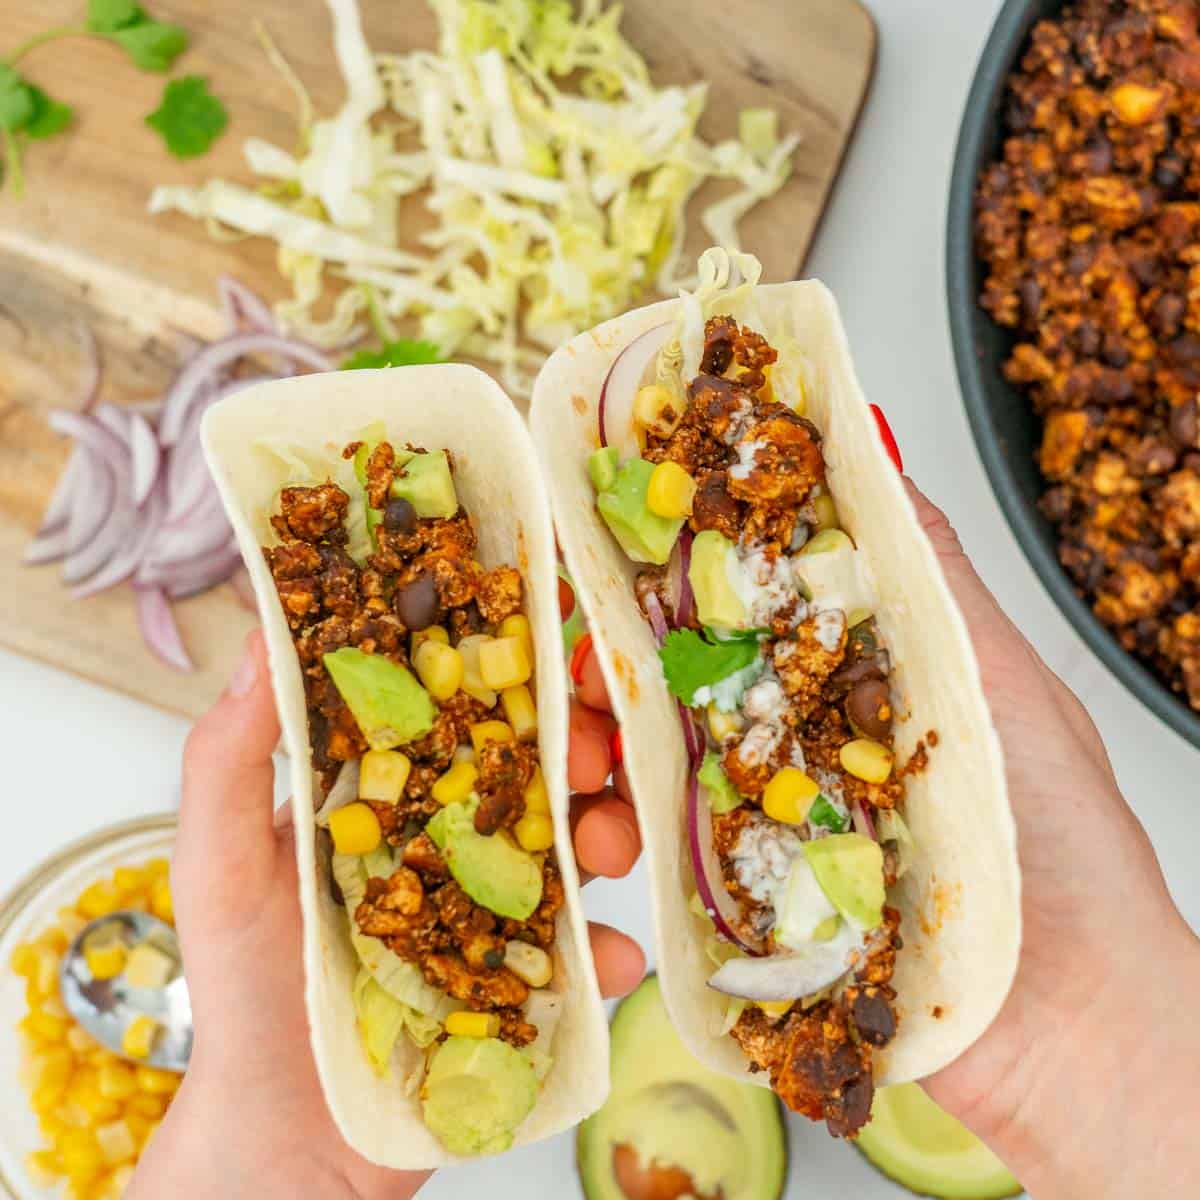 A woman's hand and a child's hand holding soft tacos filled with Mexican tofu crumbles